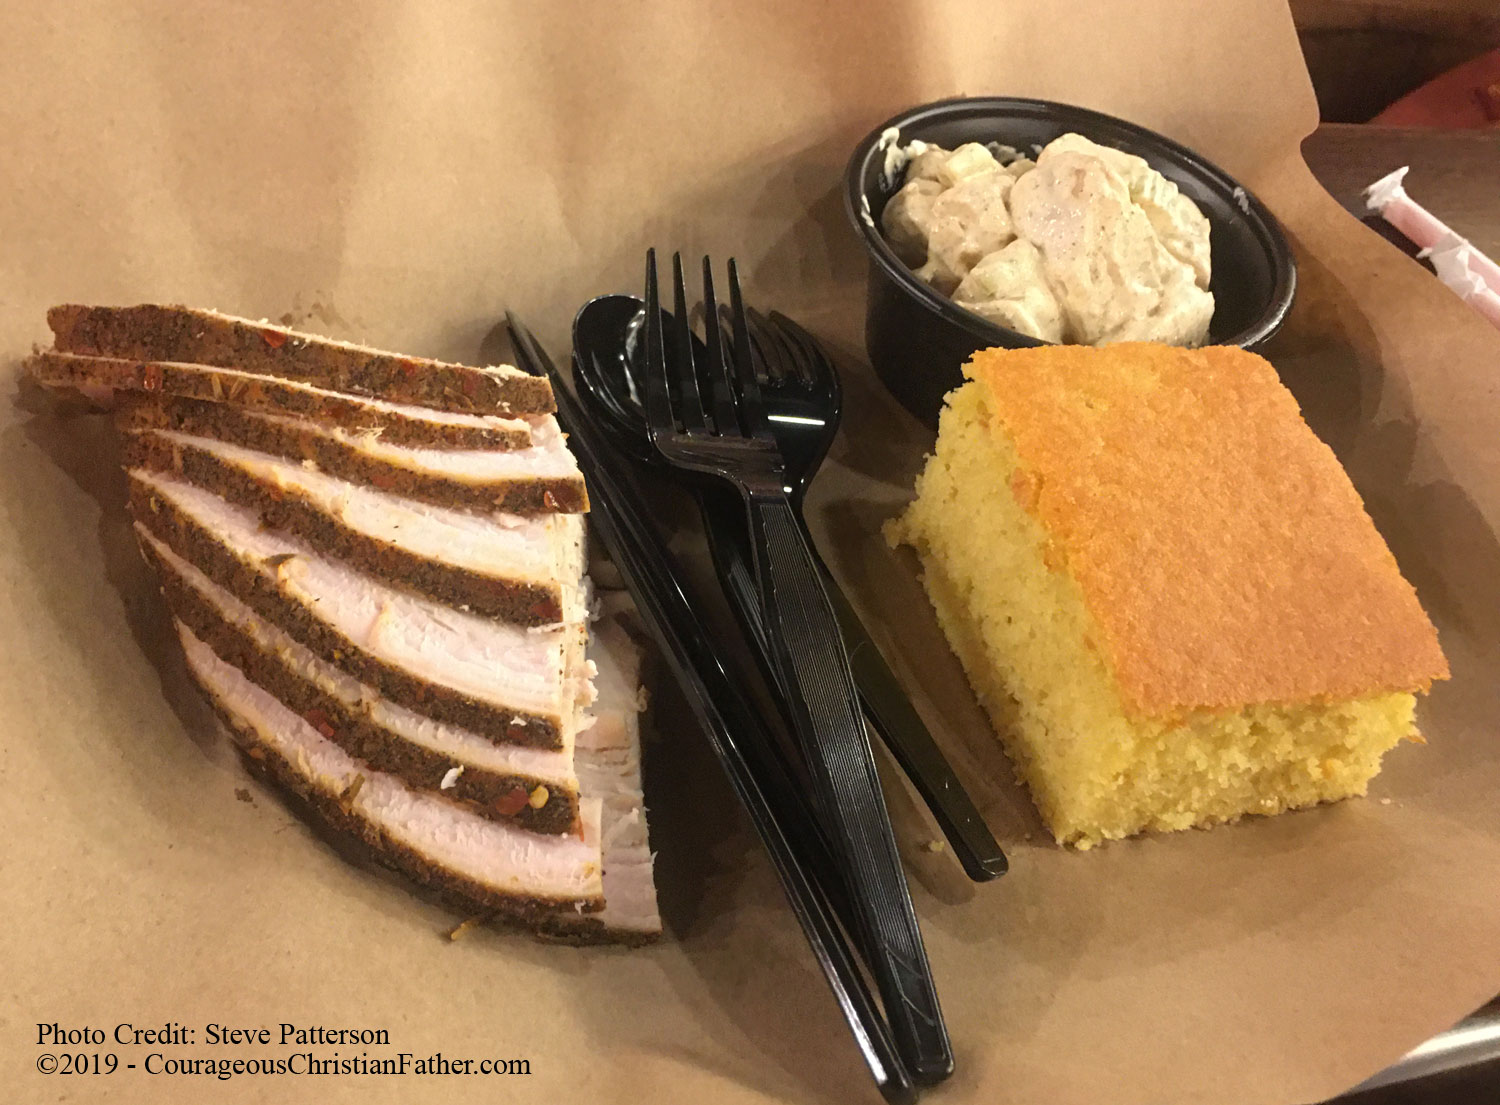 Turkey - Mission BBQ - This is this weeks Travel Thursday feature. I share about my experience at Missionary BBQ in Chattanoga, TN. #MissionBBQ